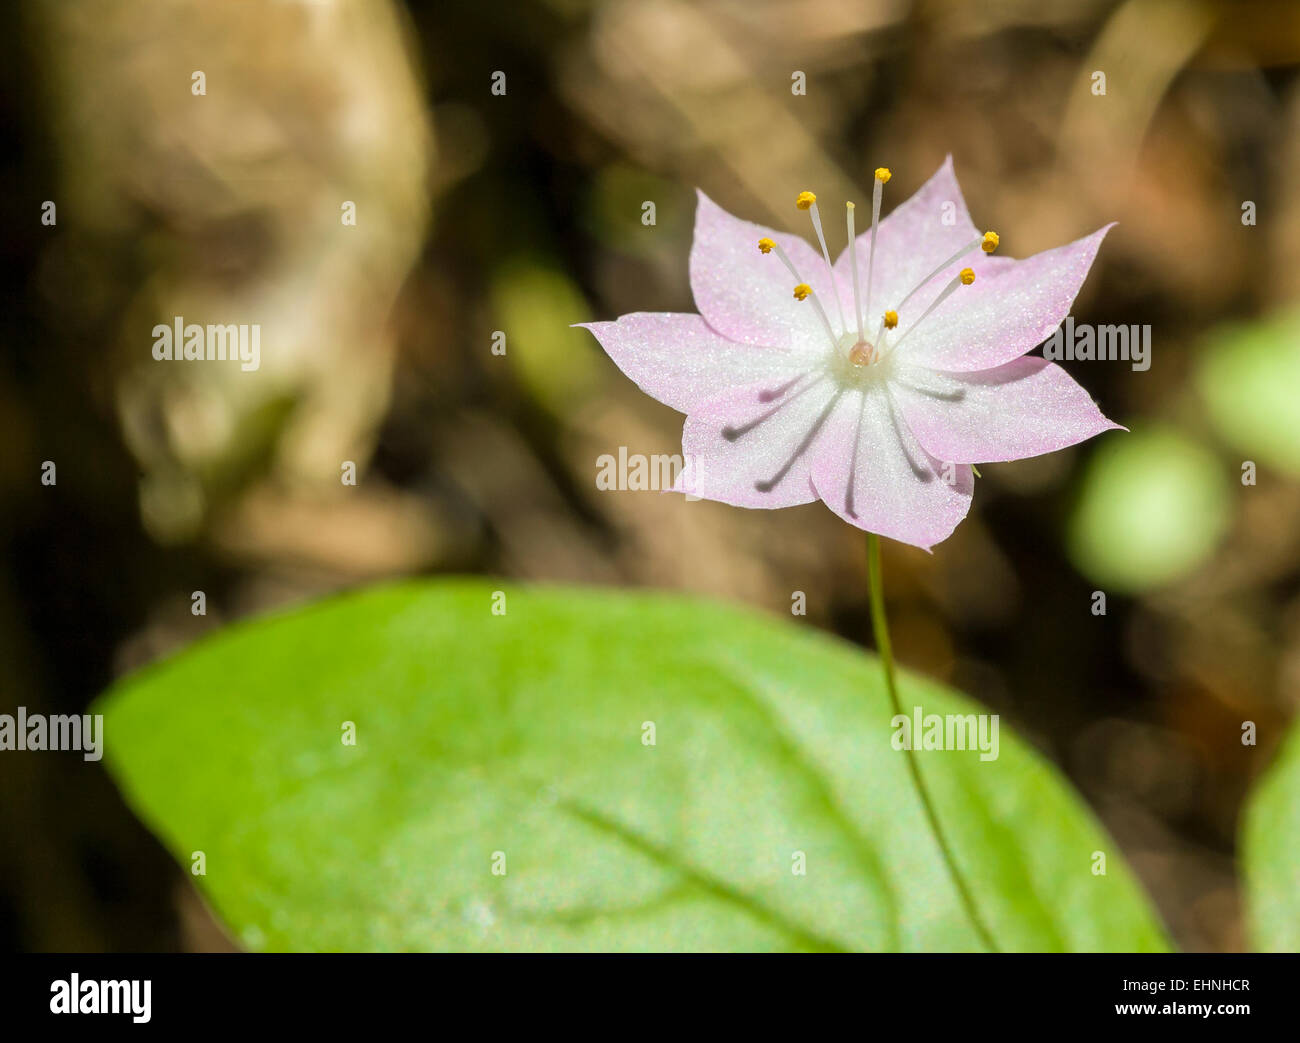 The Trientalis borealis, known as Starflower, appears to hover above its leaves on a thin, delicate stem. Stock Photo